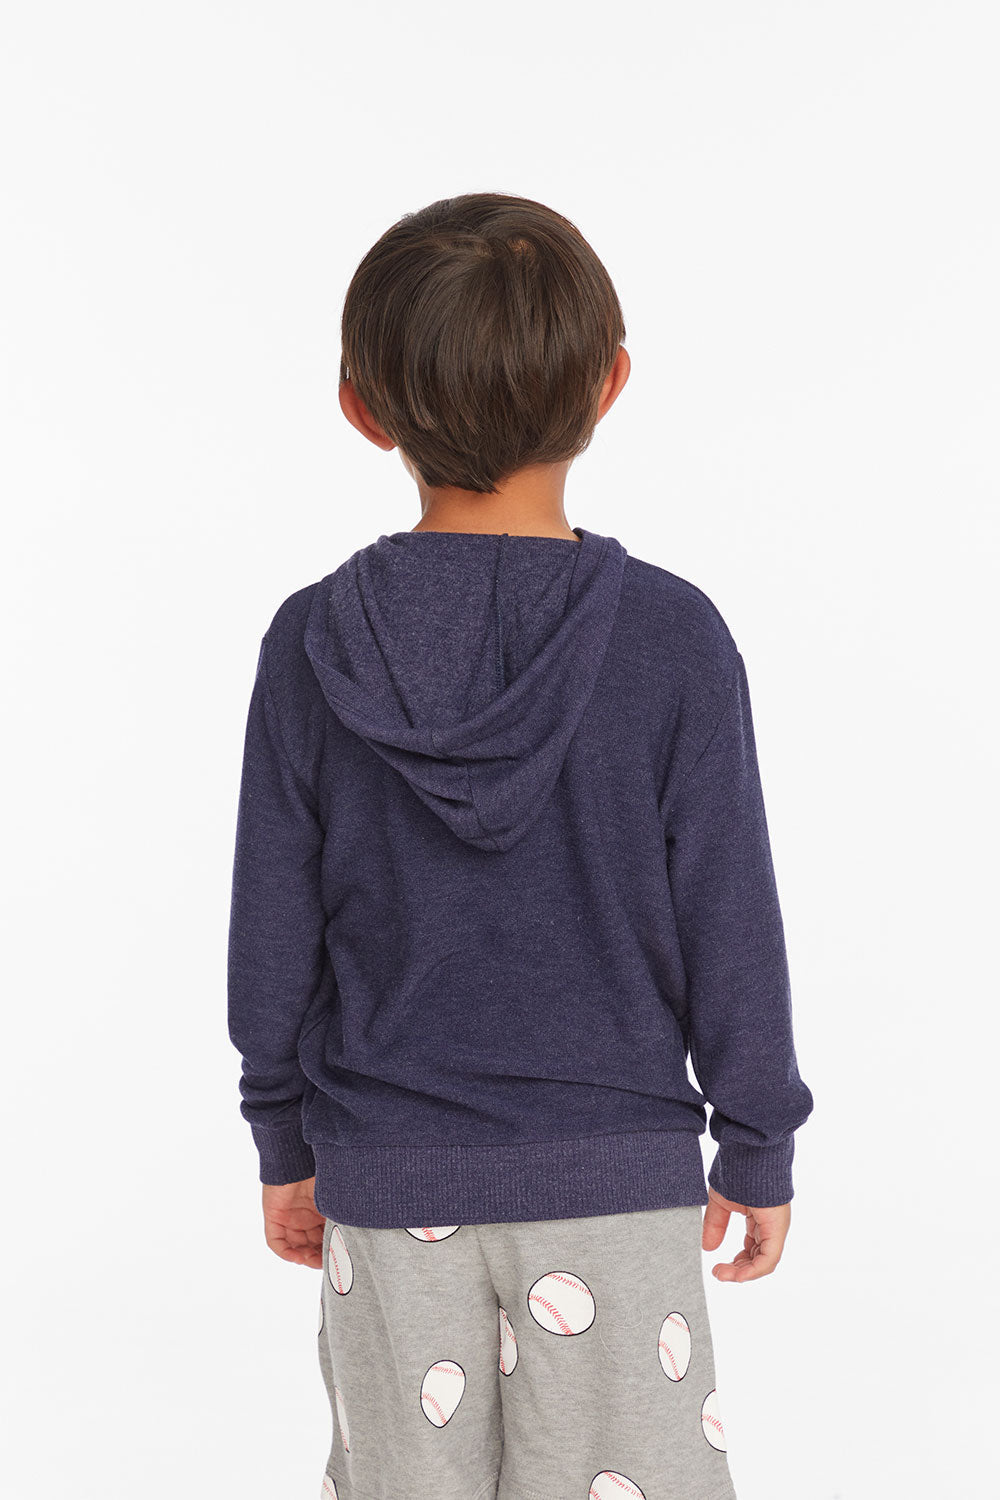 Striped Sapphire Boys Pullover Hoodie Boys chaserbrand